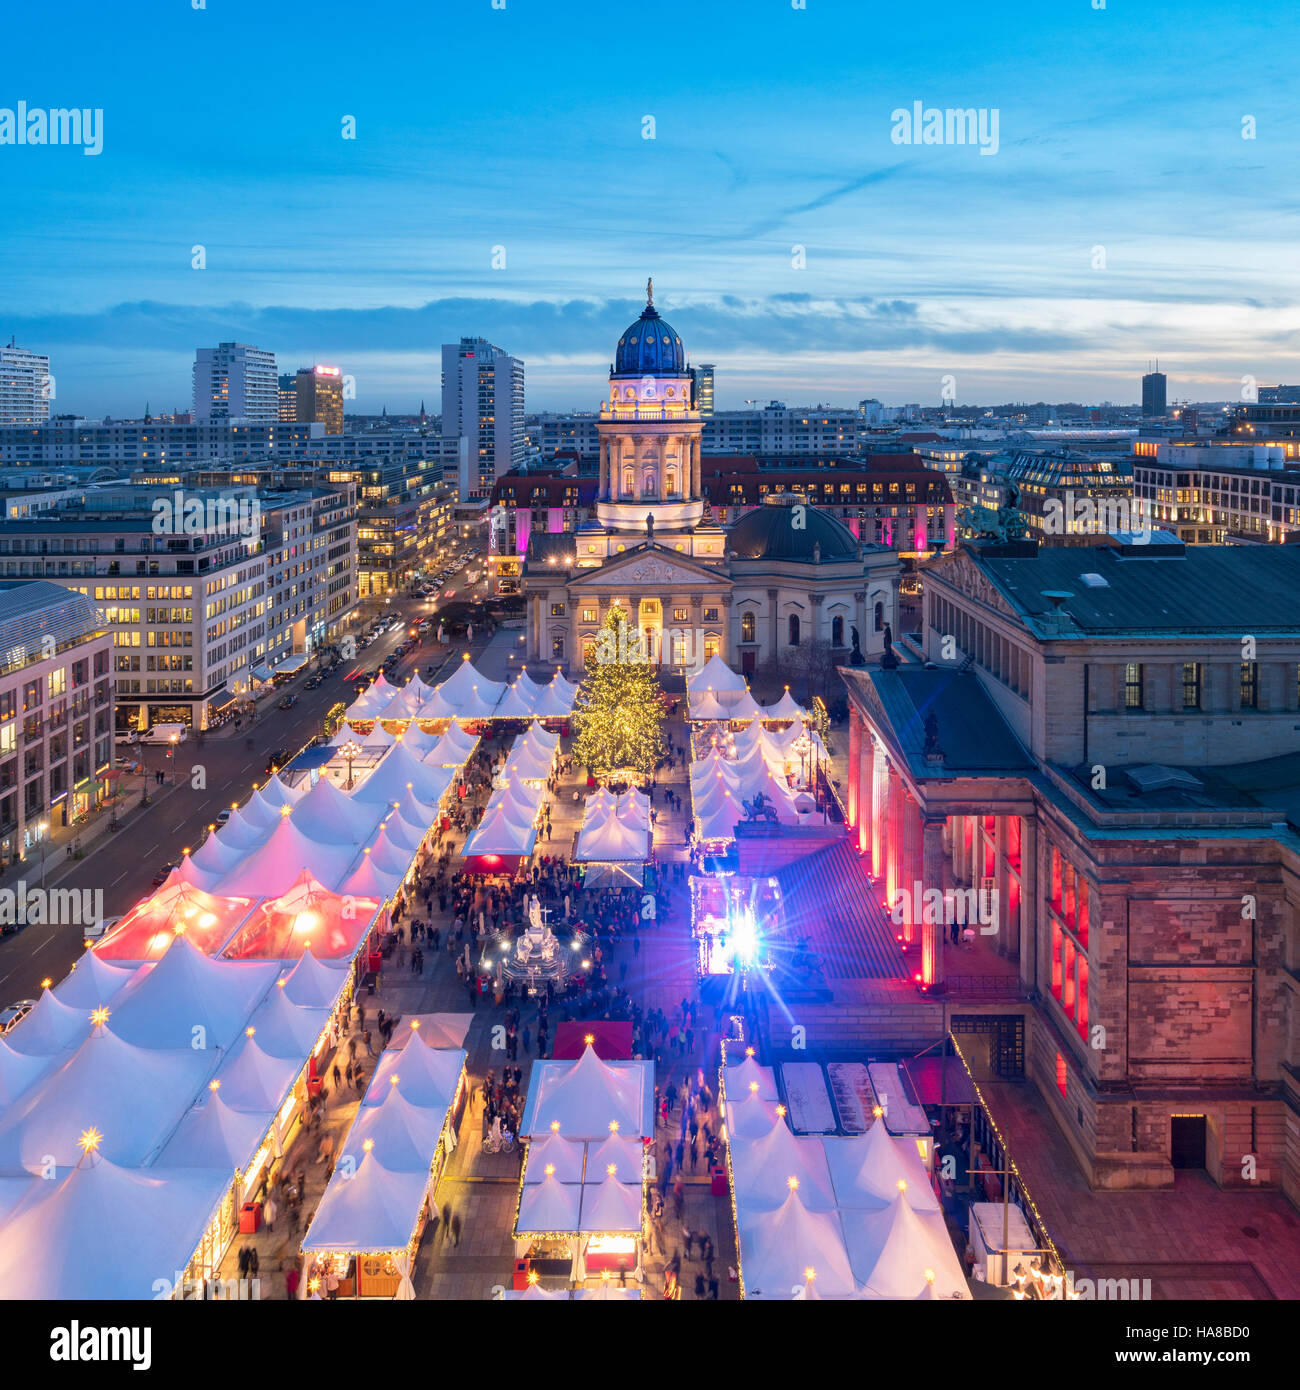 Evening view of traditional Christmas Market at Gendarmenmarkt in Berlin, Germany Stock Photo